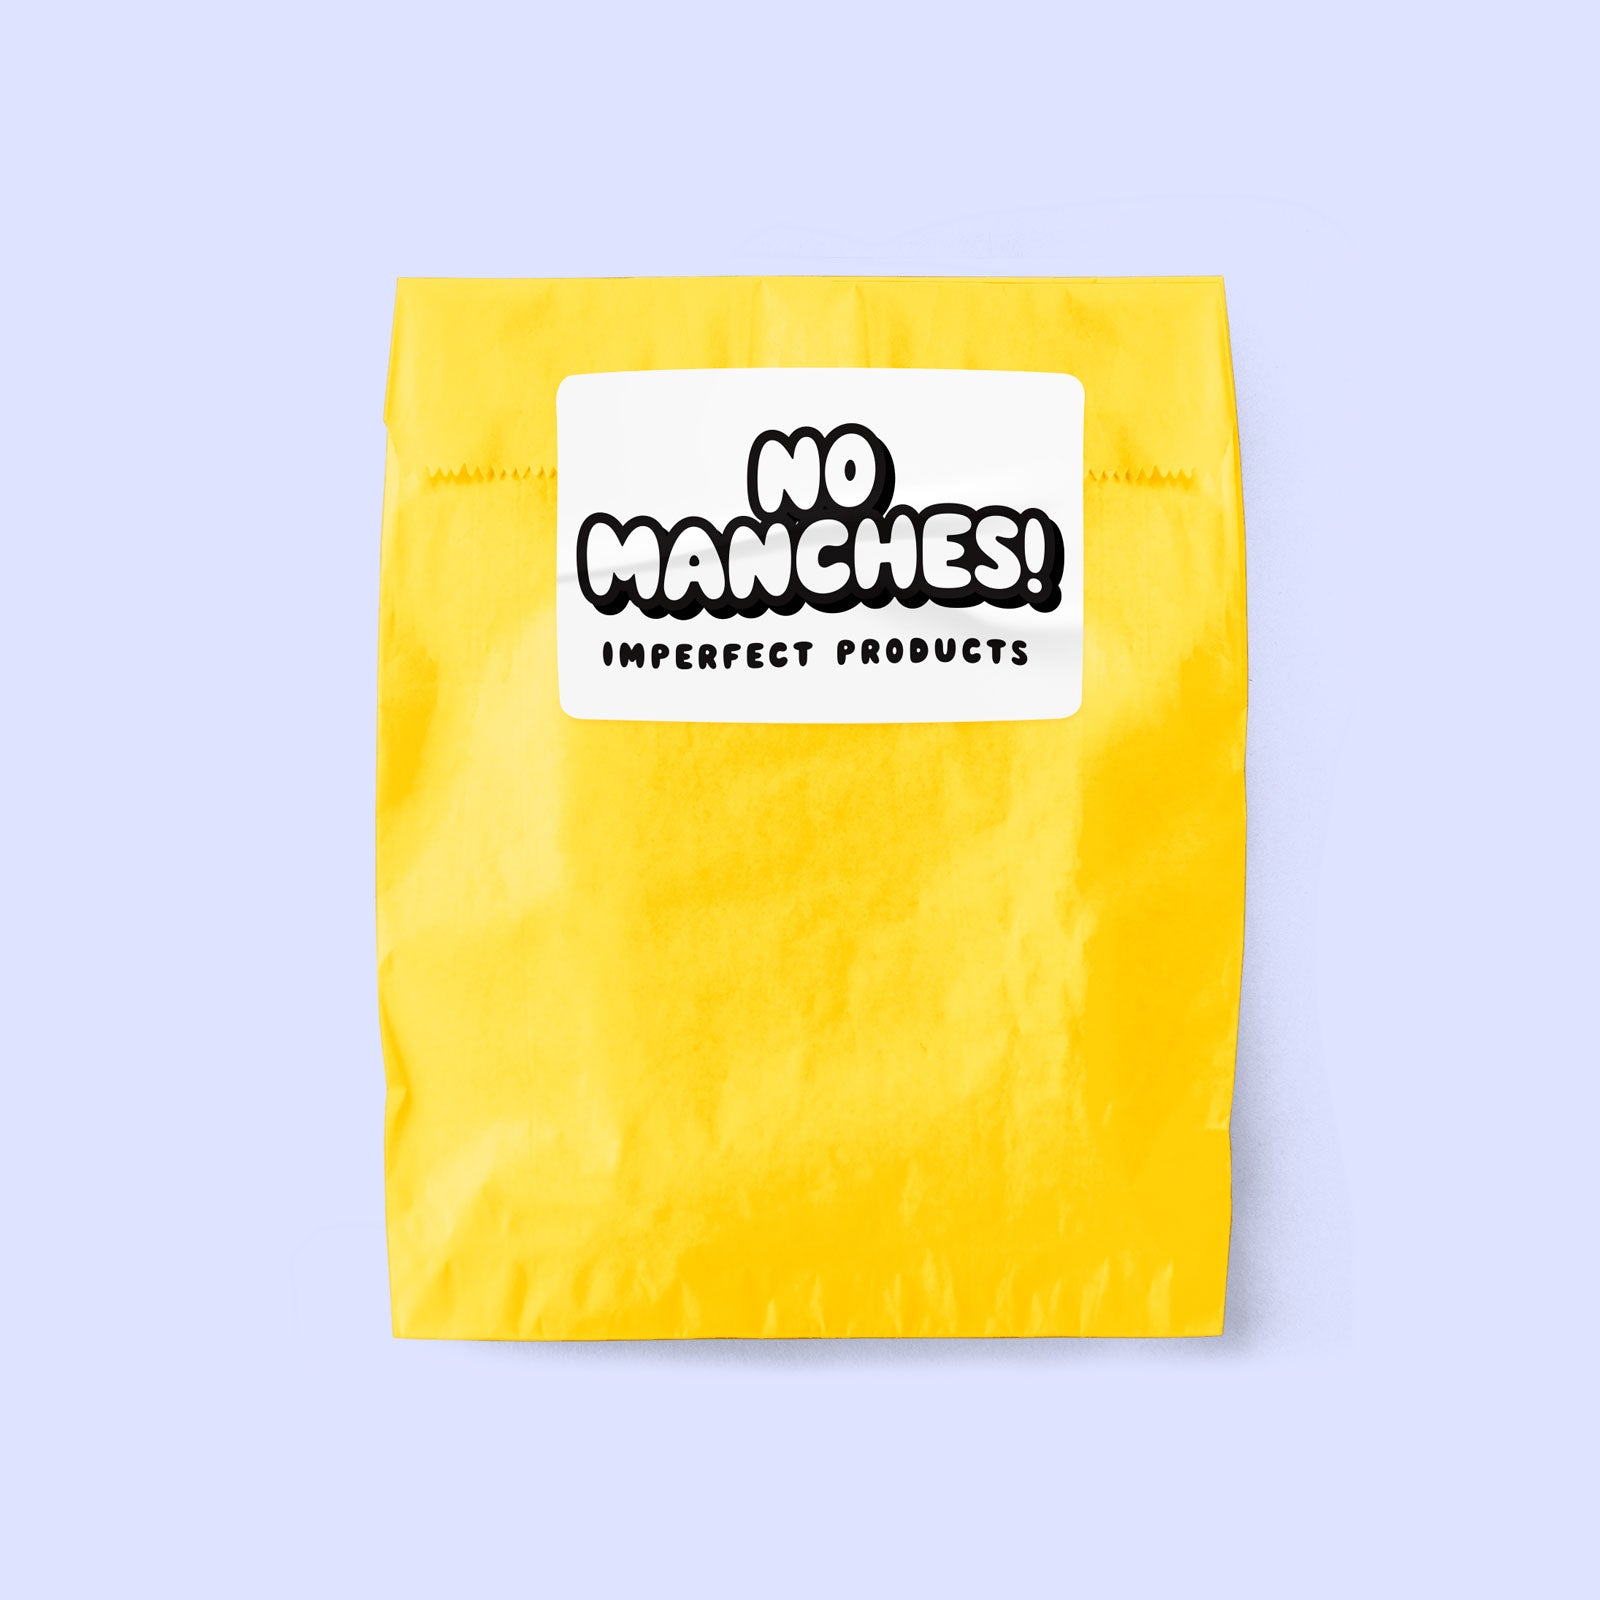 No Manches! Imperfect Products Bundle